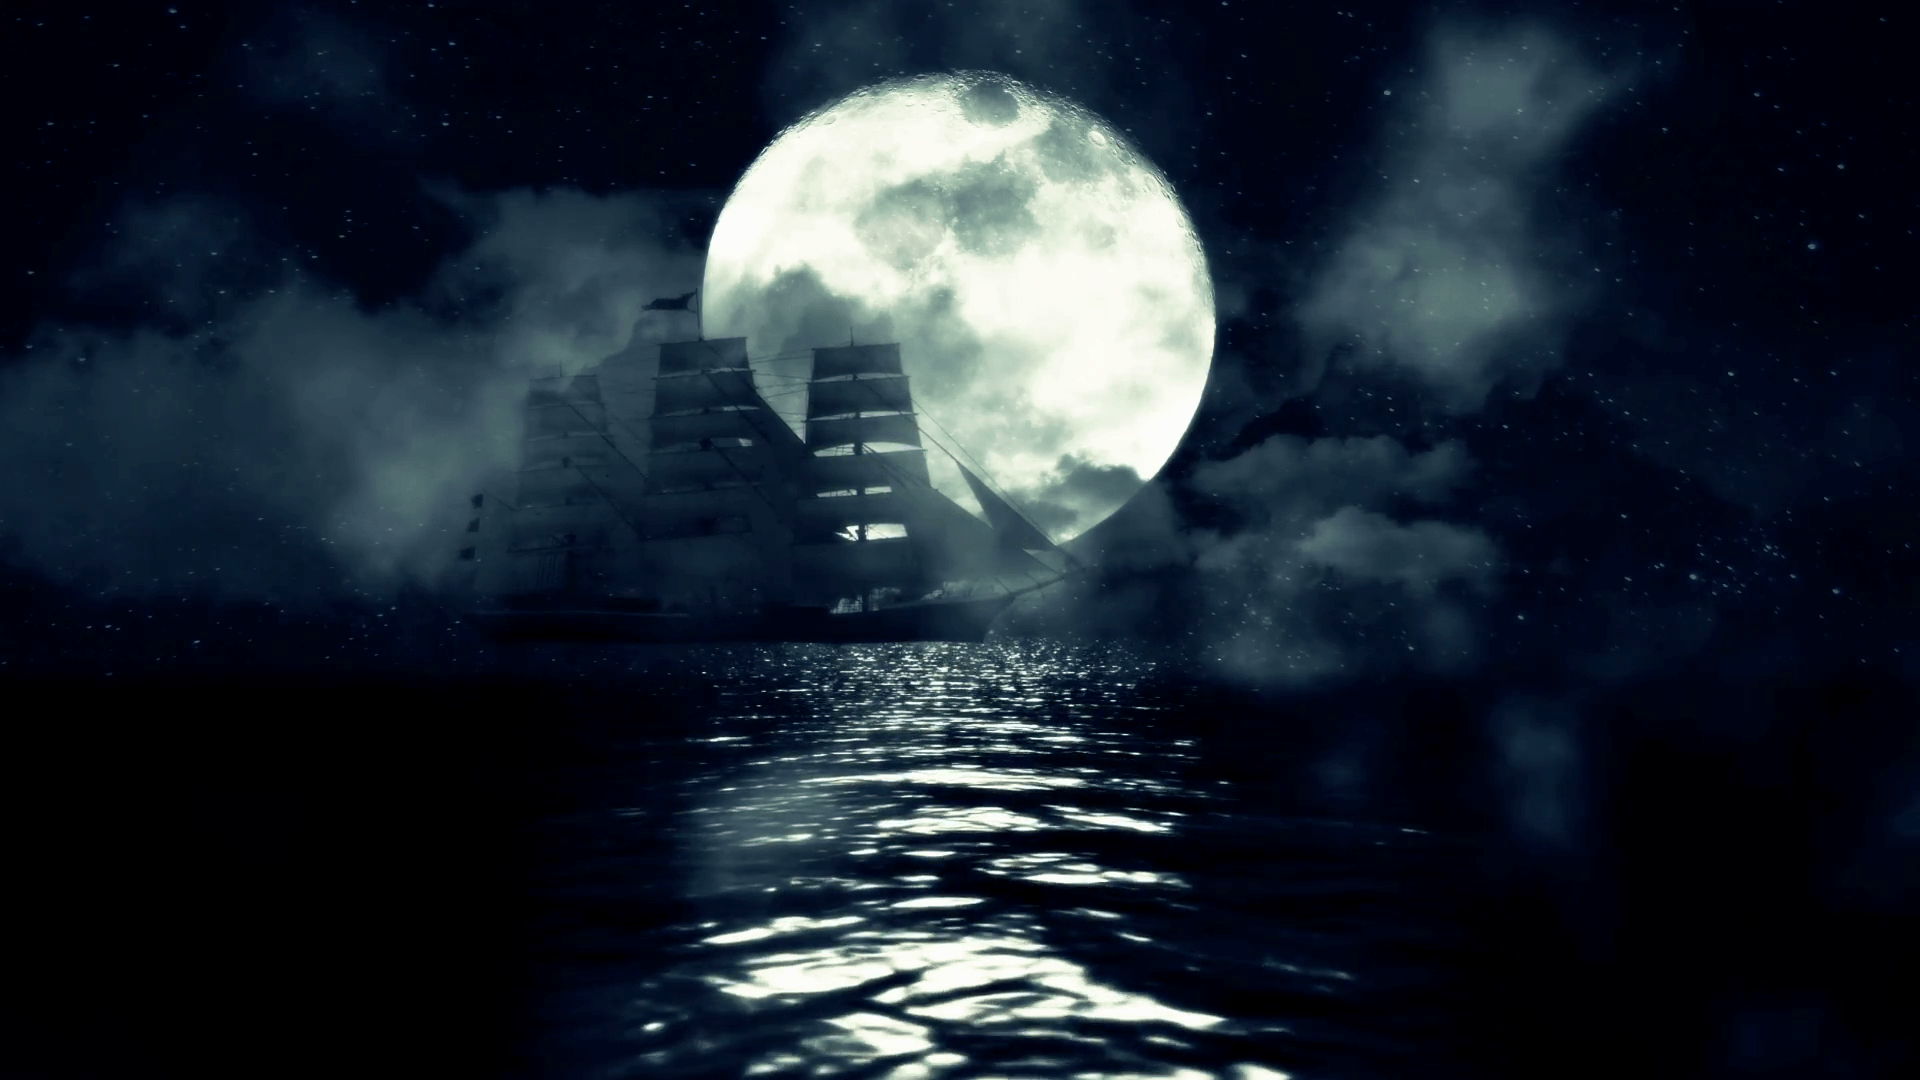 An Old Sailing ship in the Middle of a Night in the Ocean on a Full